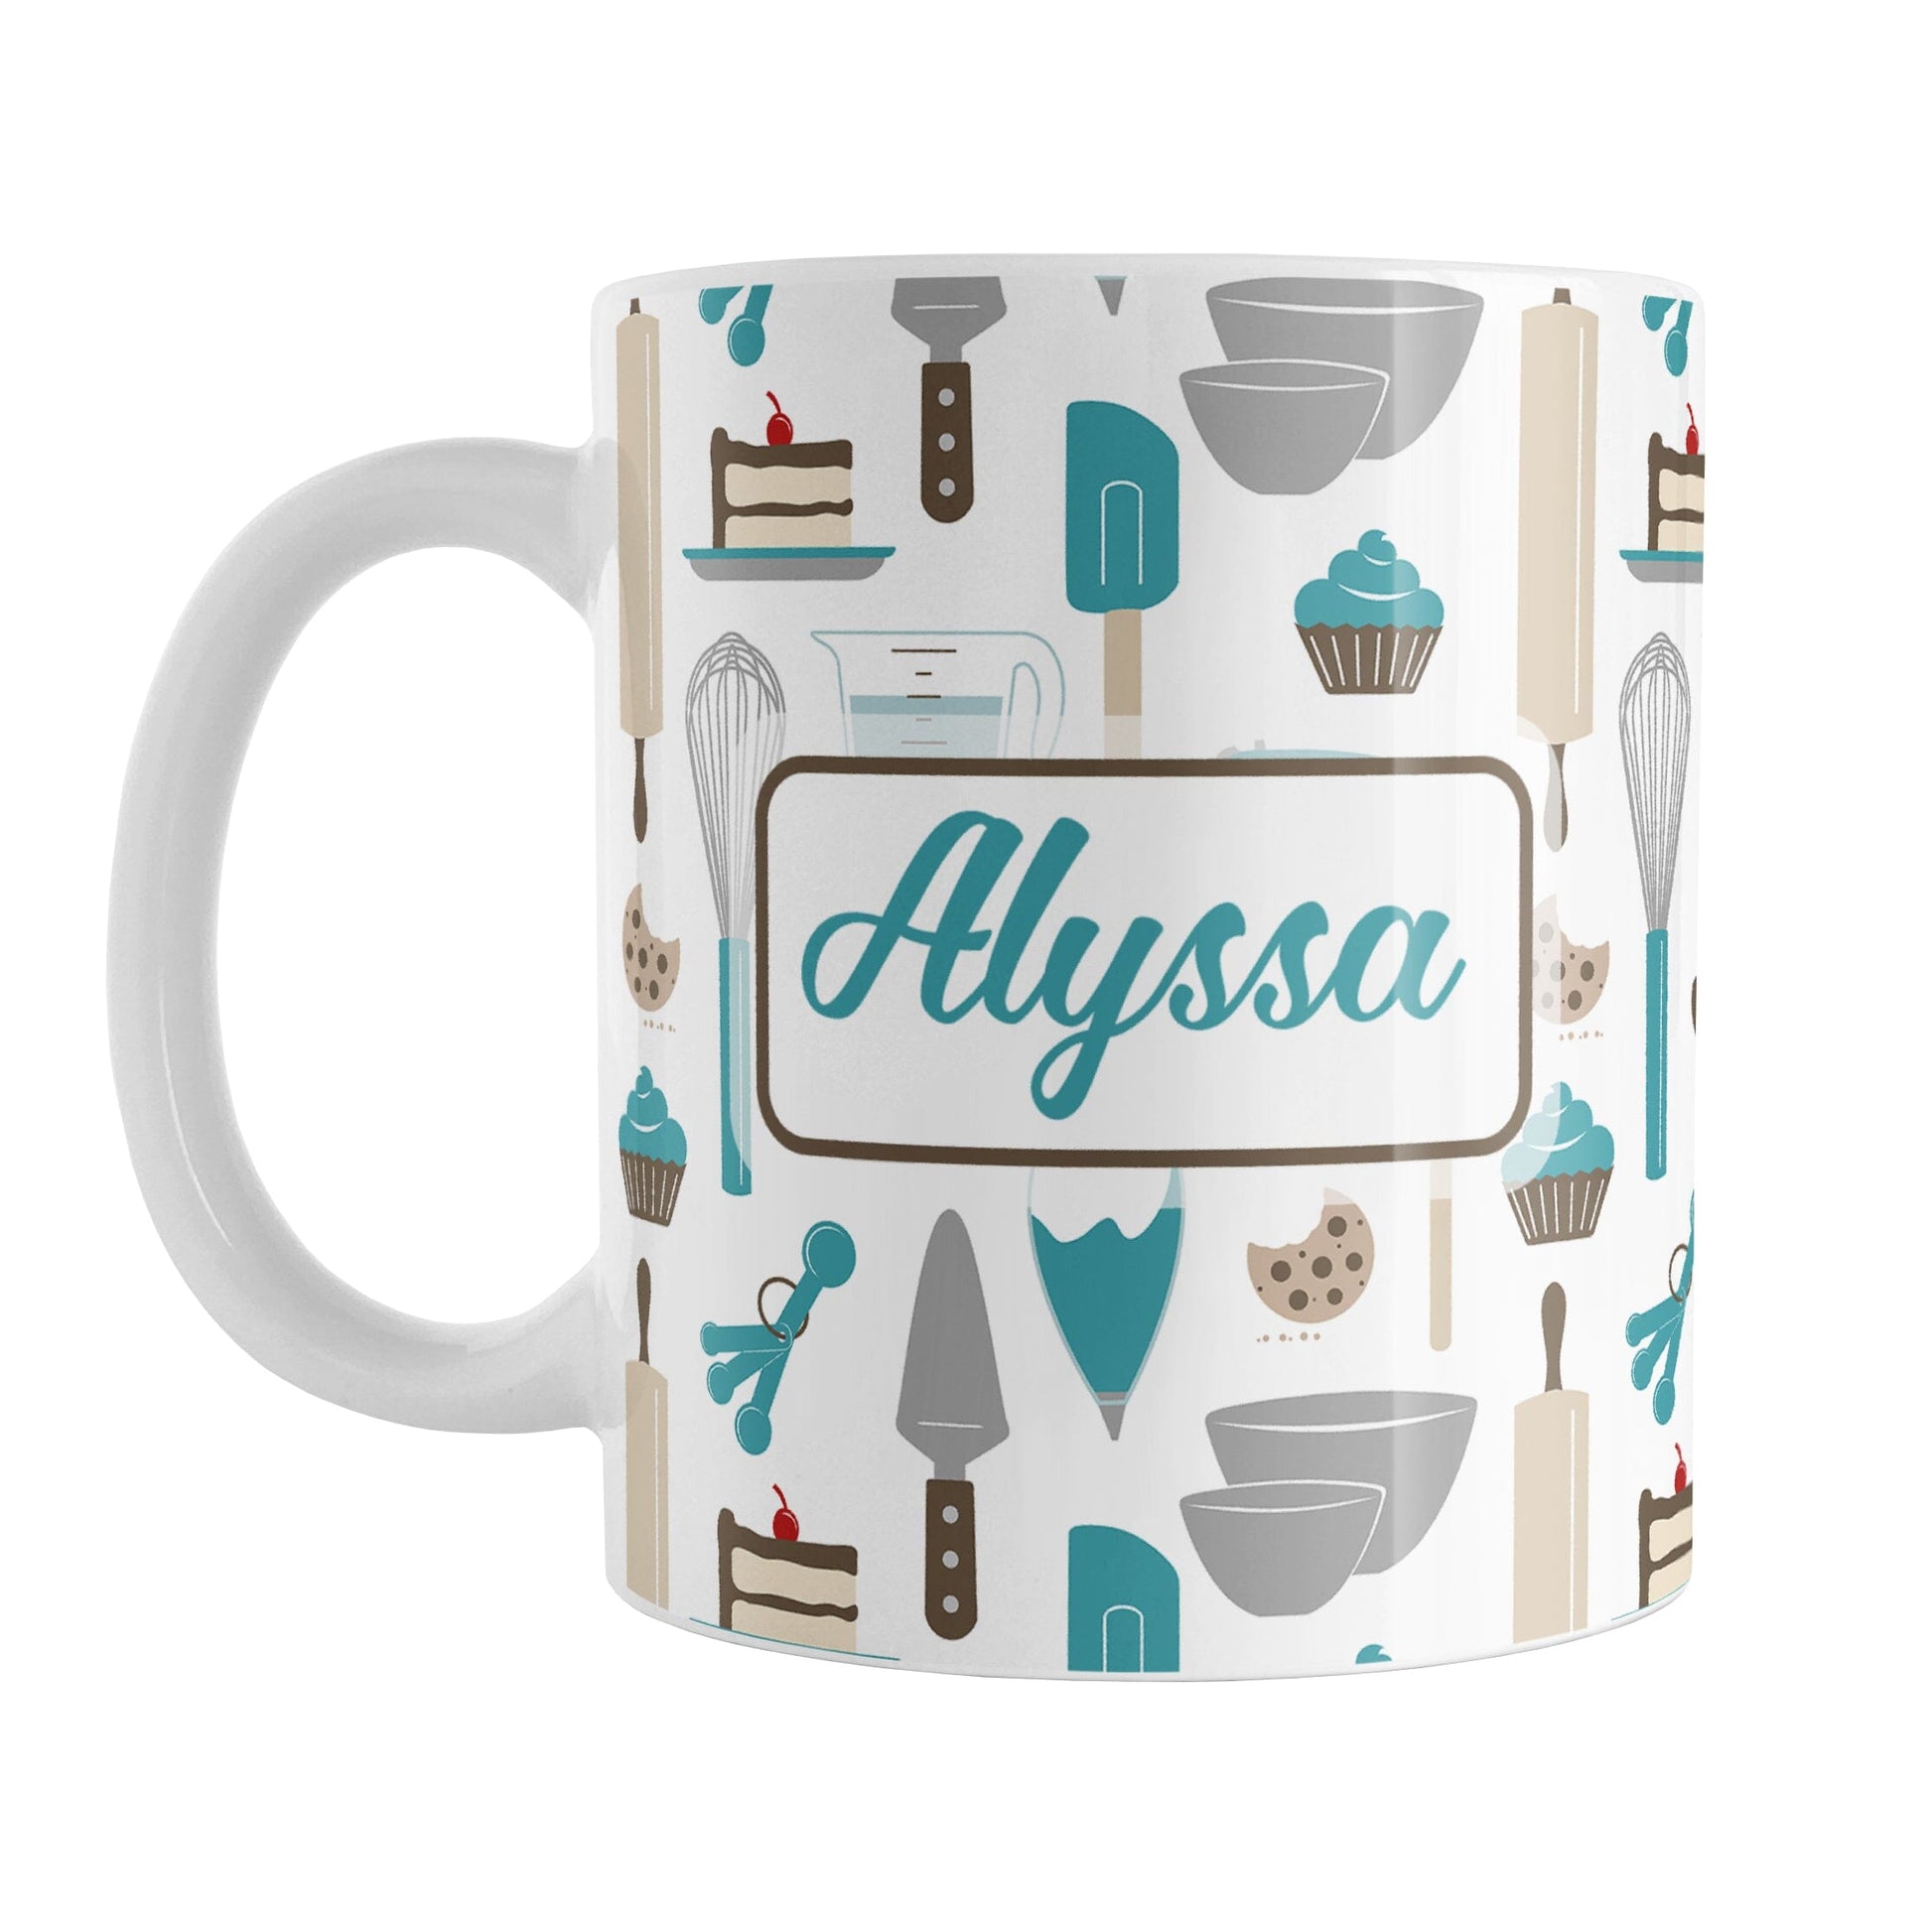 Personalized Turquoise Baking Pattern Mug (11oz) at Amy's Coffee Mugs. A ceramic coffee mug designed with a pattern of baking tools like spatulas, whisks, mixers, bowls, and spoons, with cookies, cupcakes, and cake all in a turquoise, gray, brown, and beige color scheme that wraps around the mug. Your name is printed in a turquoise script font on both sides of the mug over the baking pattern. 